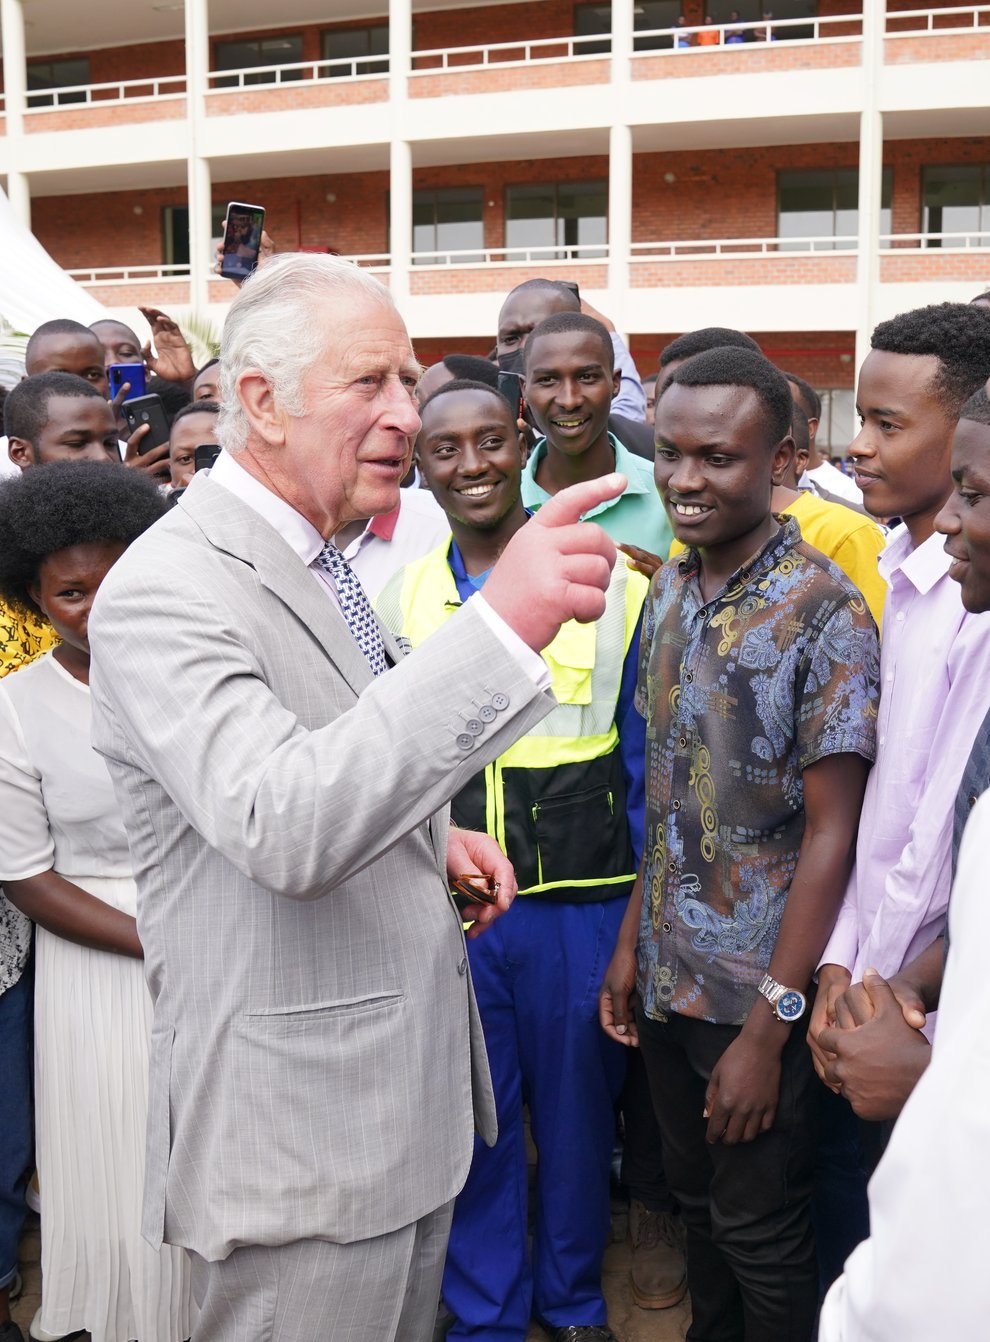 The Prince of Wales meets students during a visit to the Integrated Polytechnic Regional College (IPRC) in Kigali to learn about the work and history of IPRC, and meet with Prince’s Trust International (PTI) delivery partners and beneficiaries from Rwanda and across the Commonwealth (Jonathan Brady/PA)